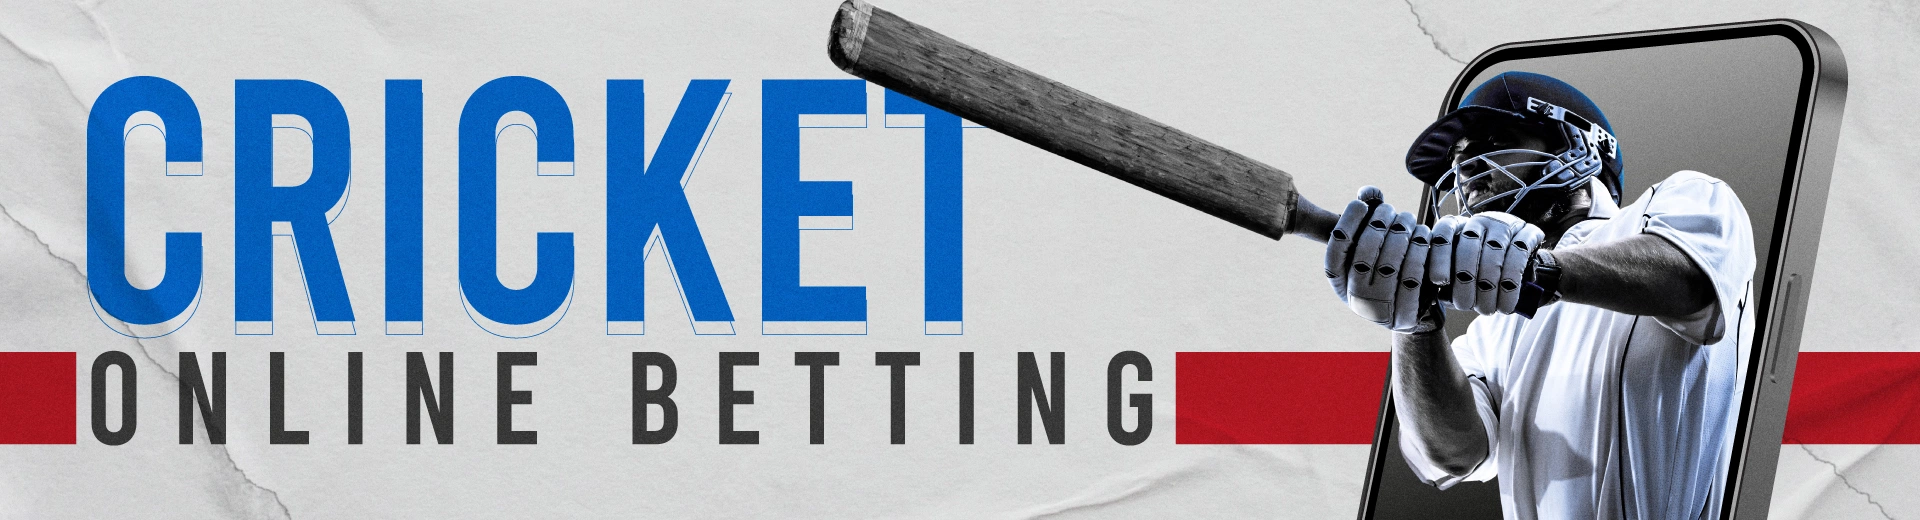 Cricket Online Betting in the Philippines - OKBET sports betting